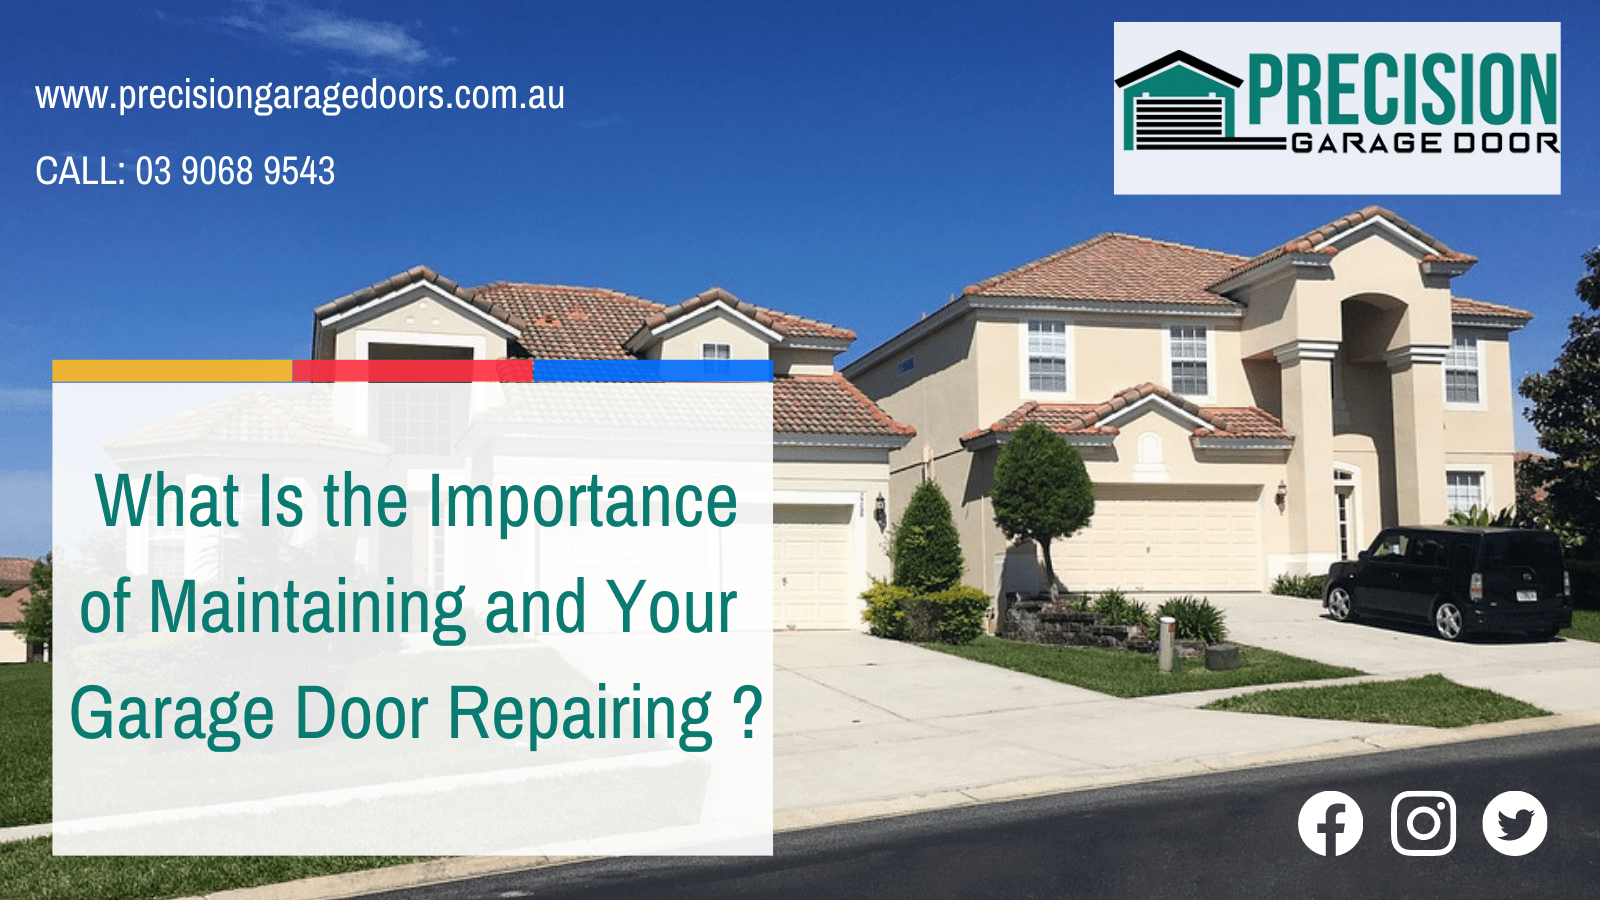 What Is the Importance of Maintaining and Your Garage Door Repairing